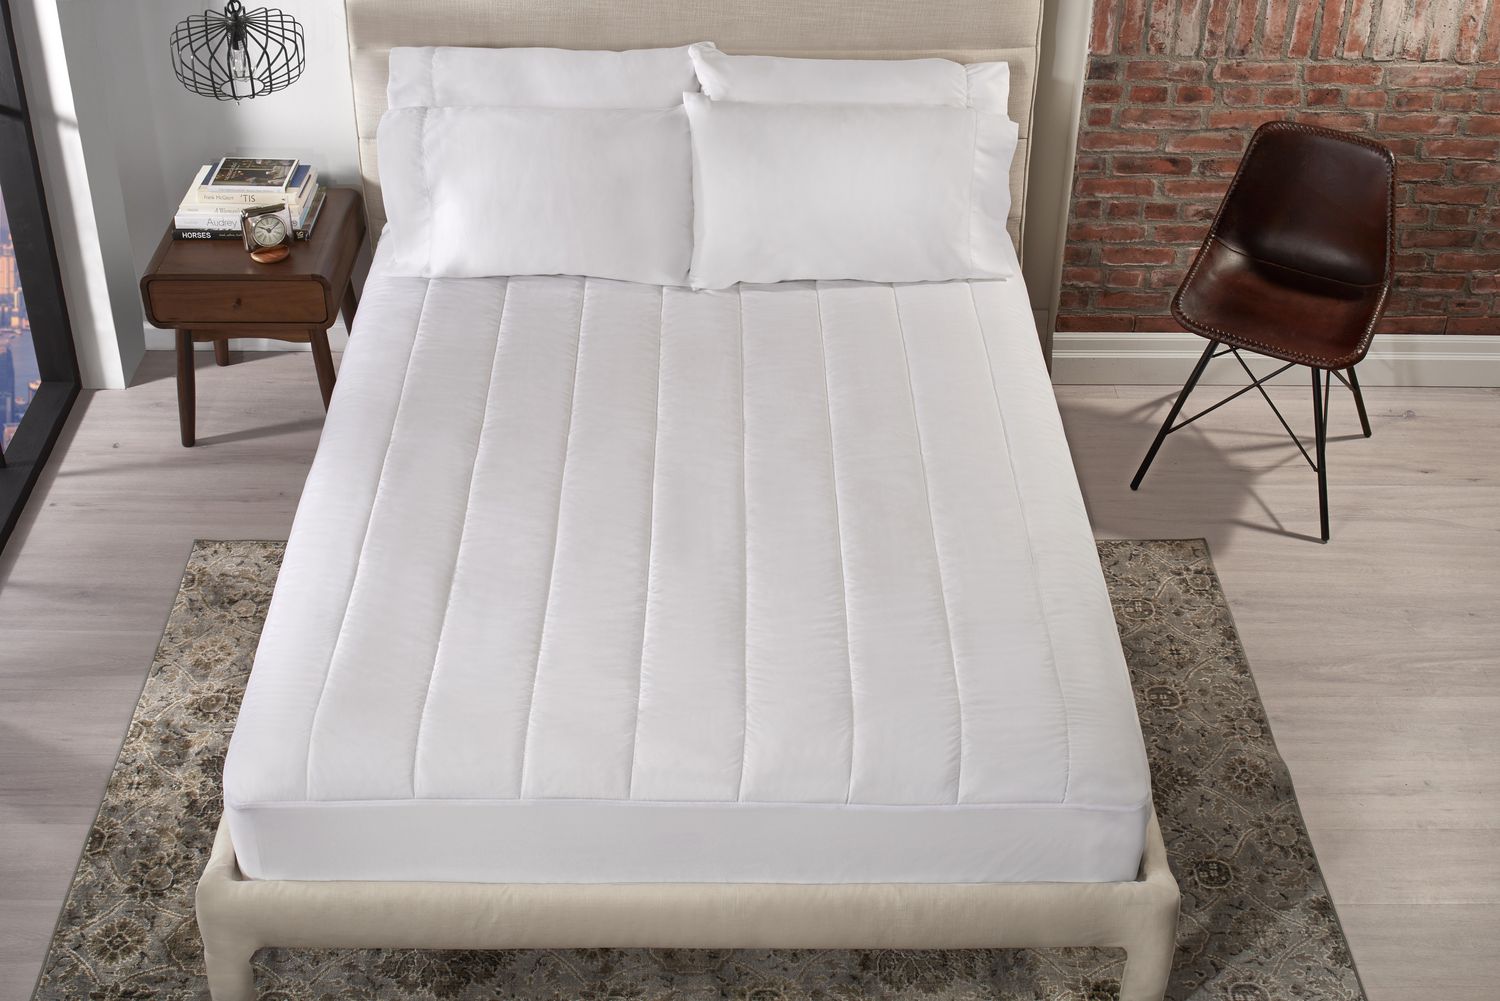 sunbeam quilted queen size heated electric mattress pad